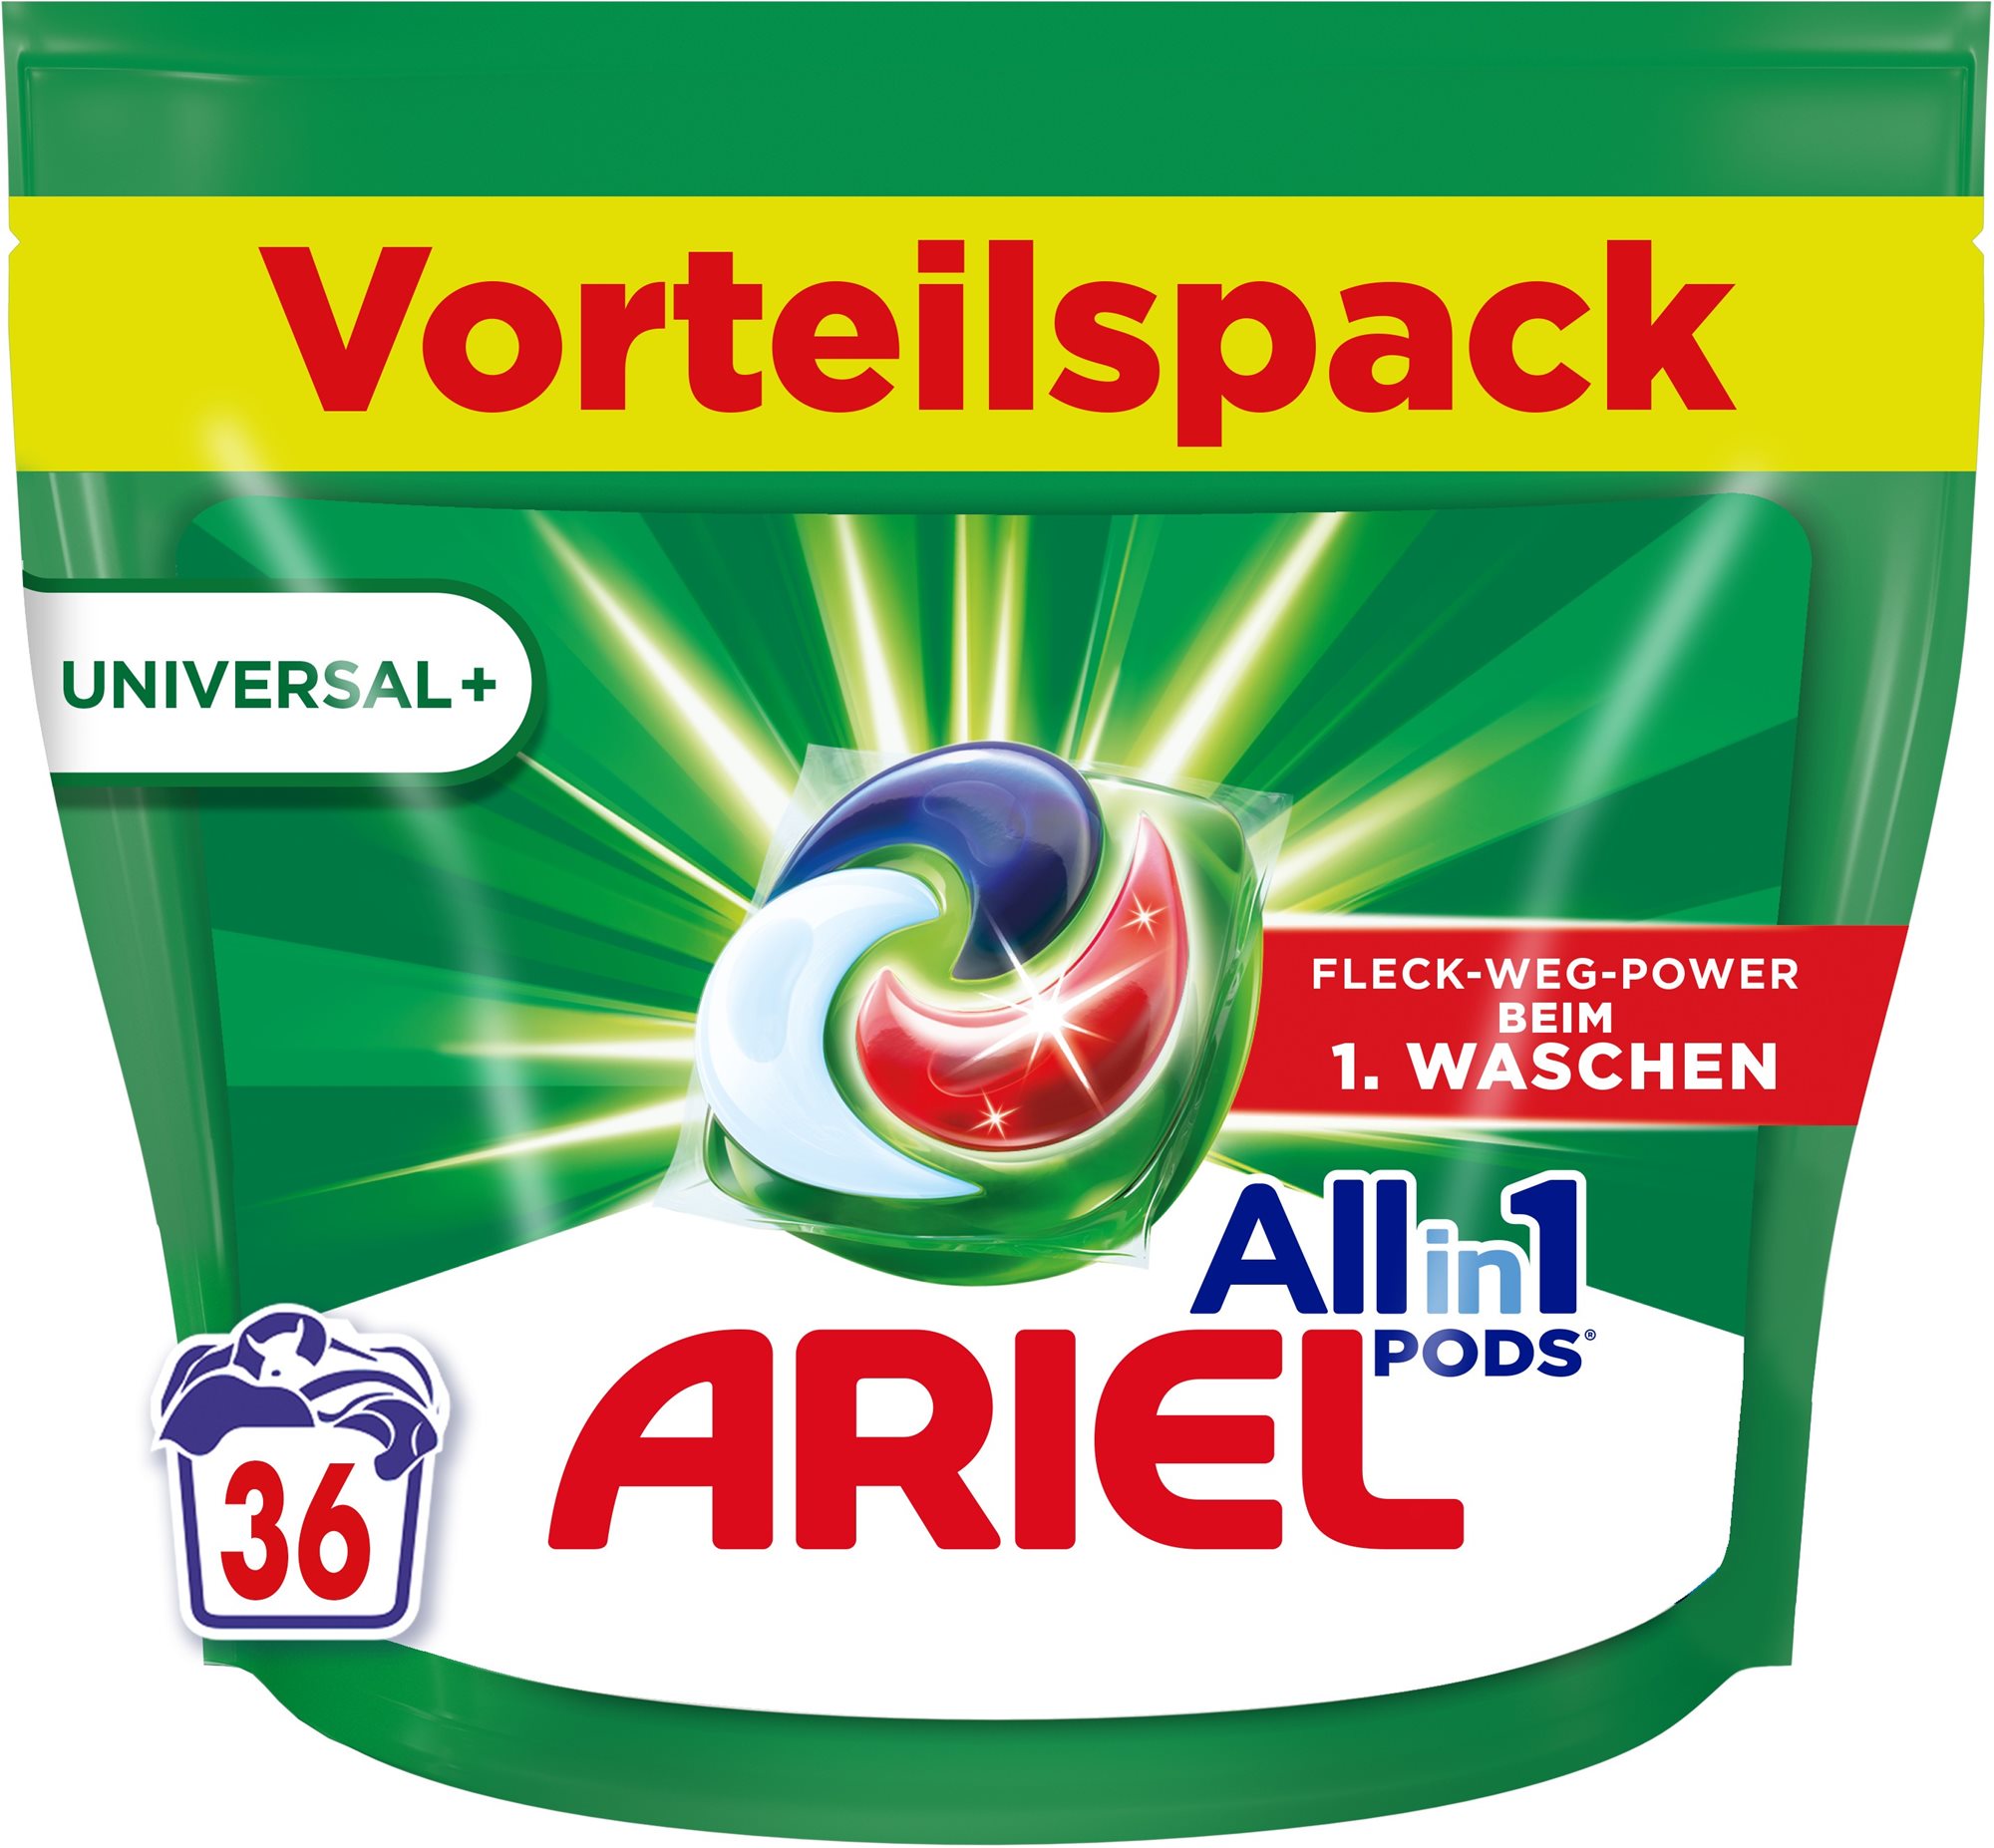 ARIEL All-In-1 Pods Universal+ 36 db